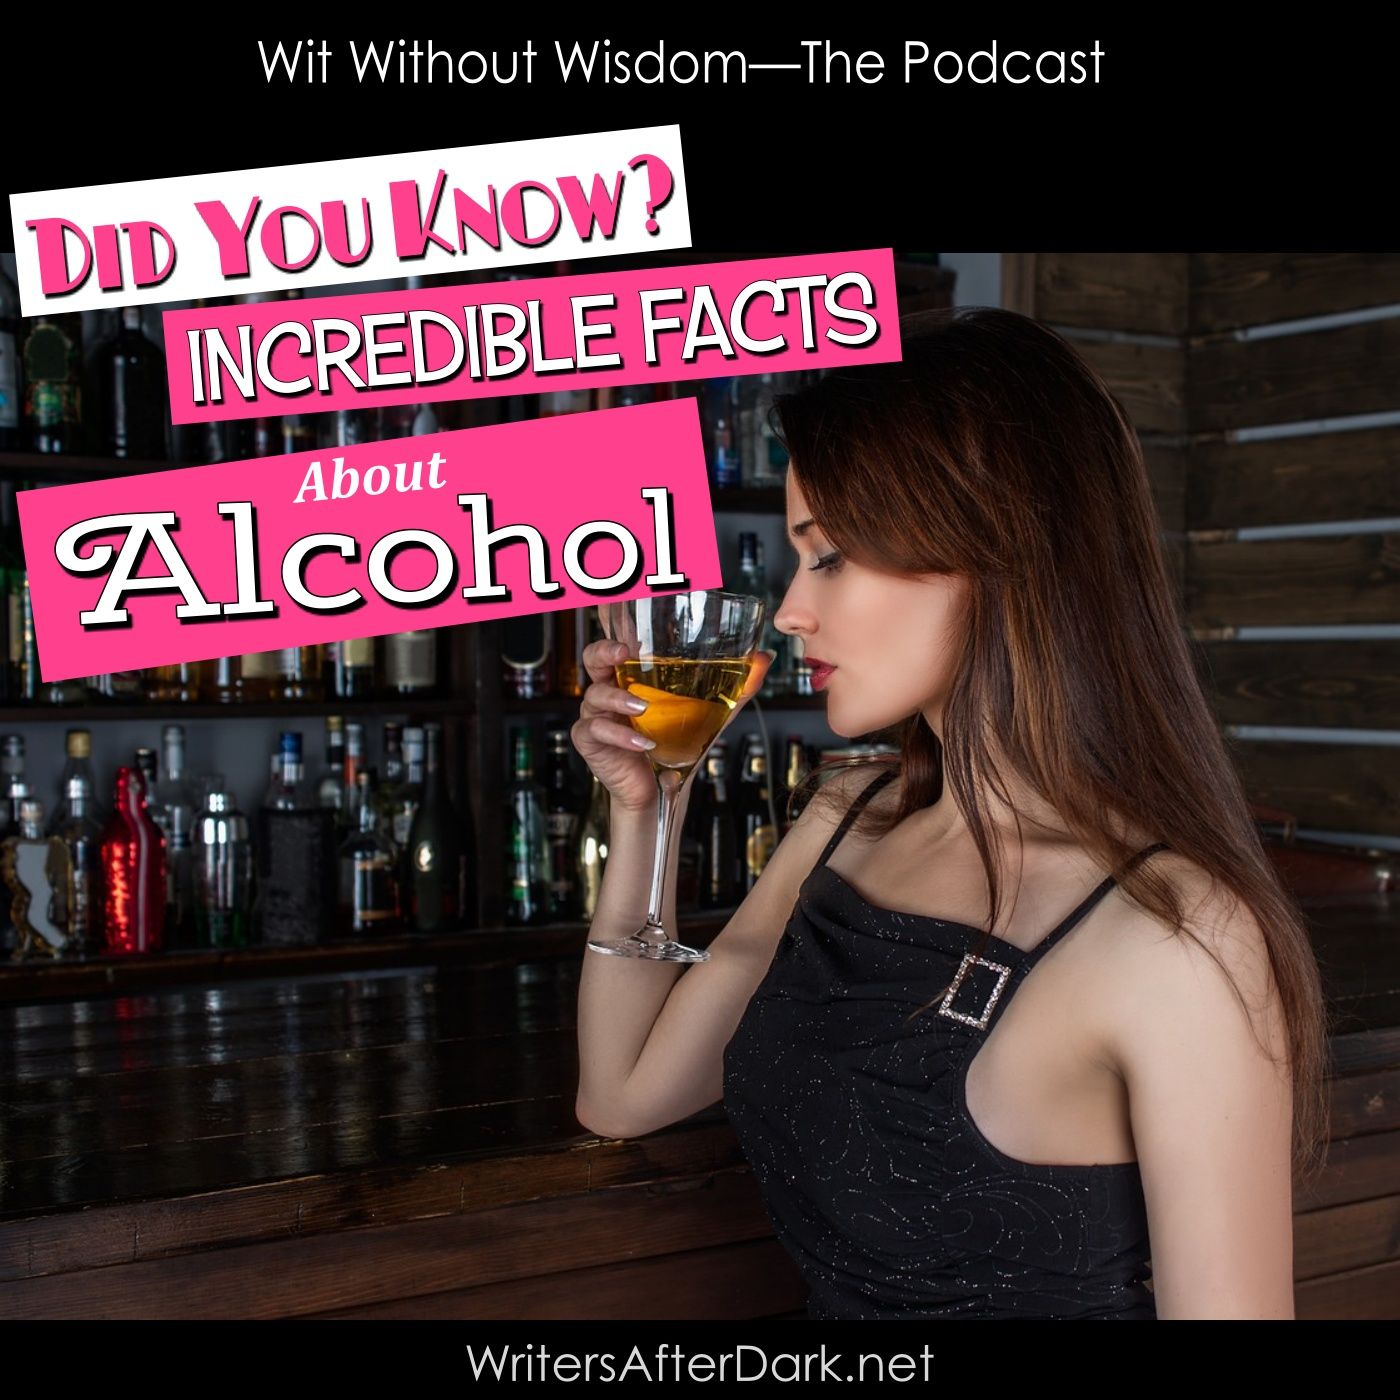 Incredible Facts About Alcohol